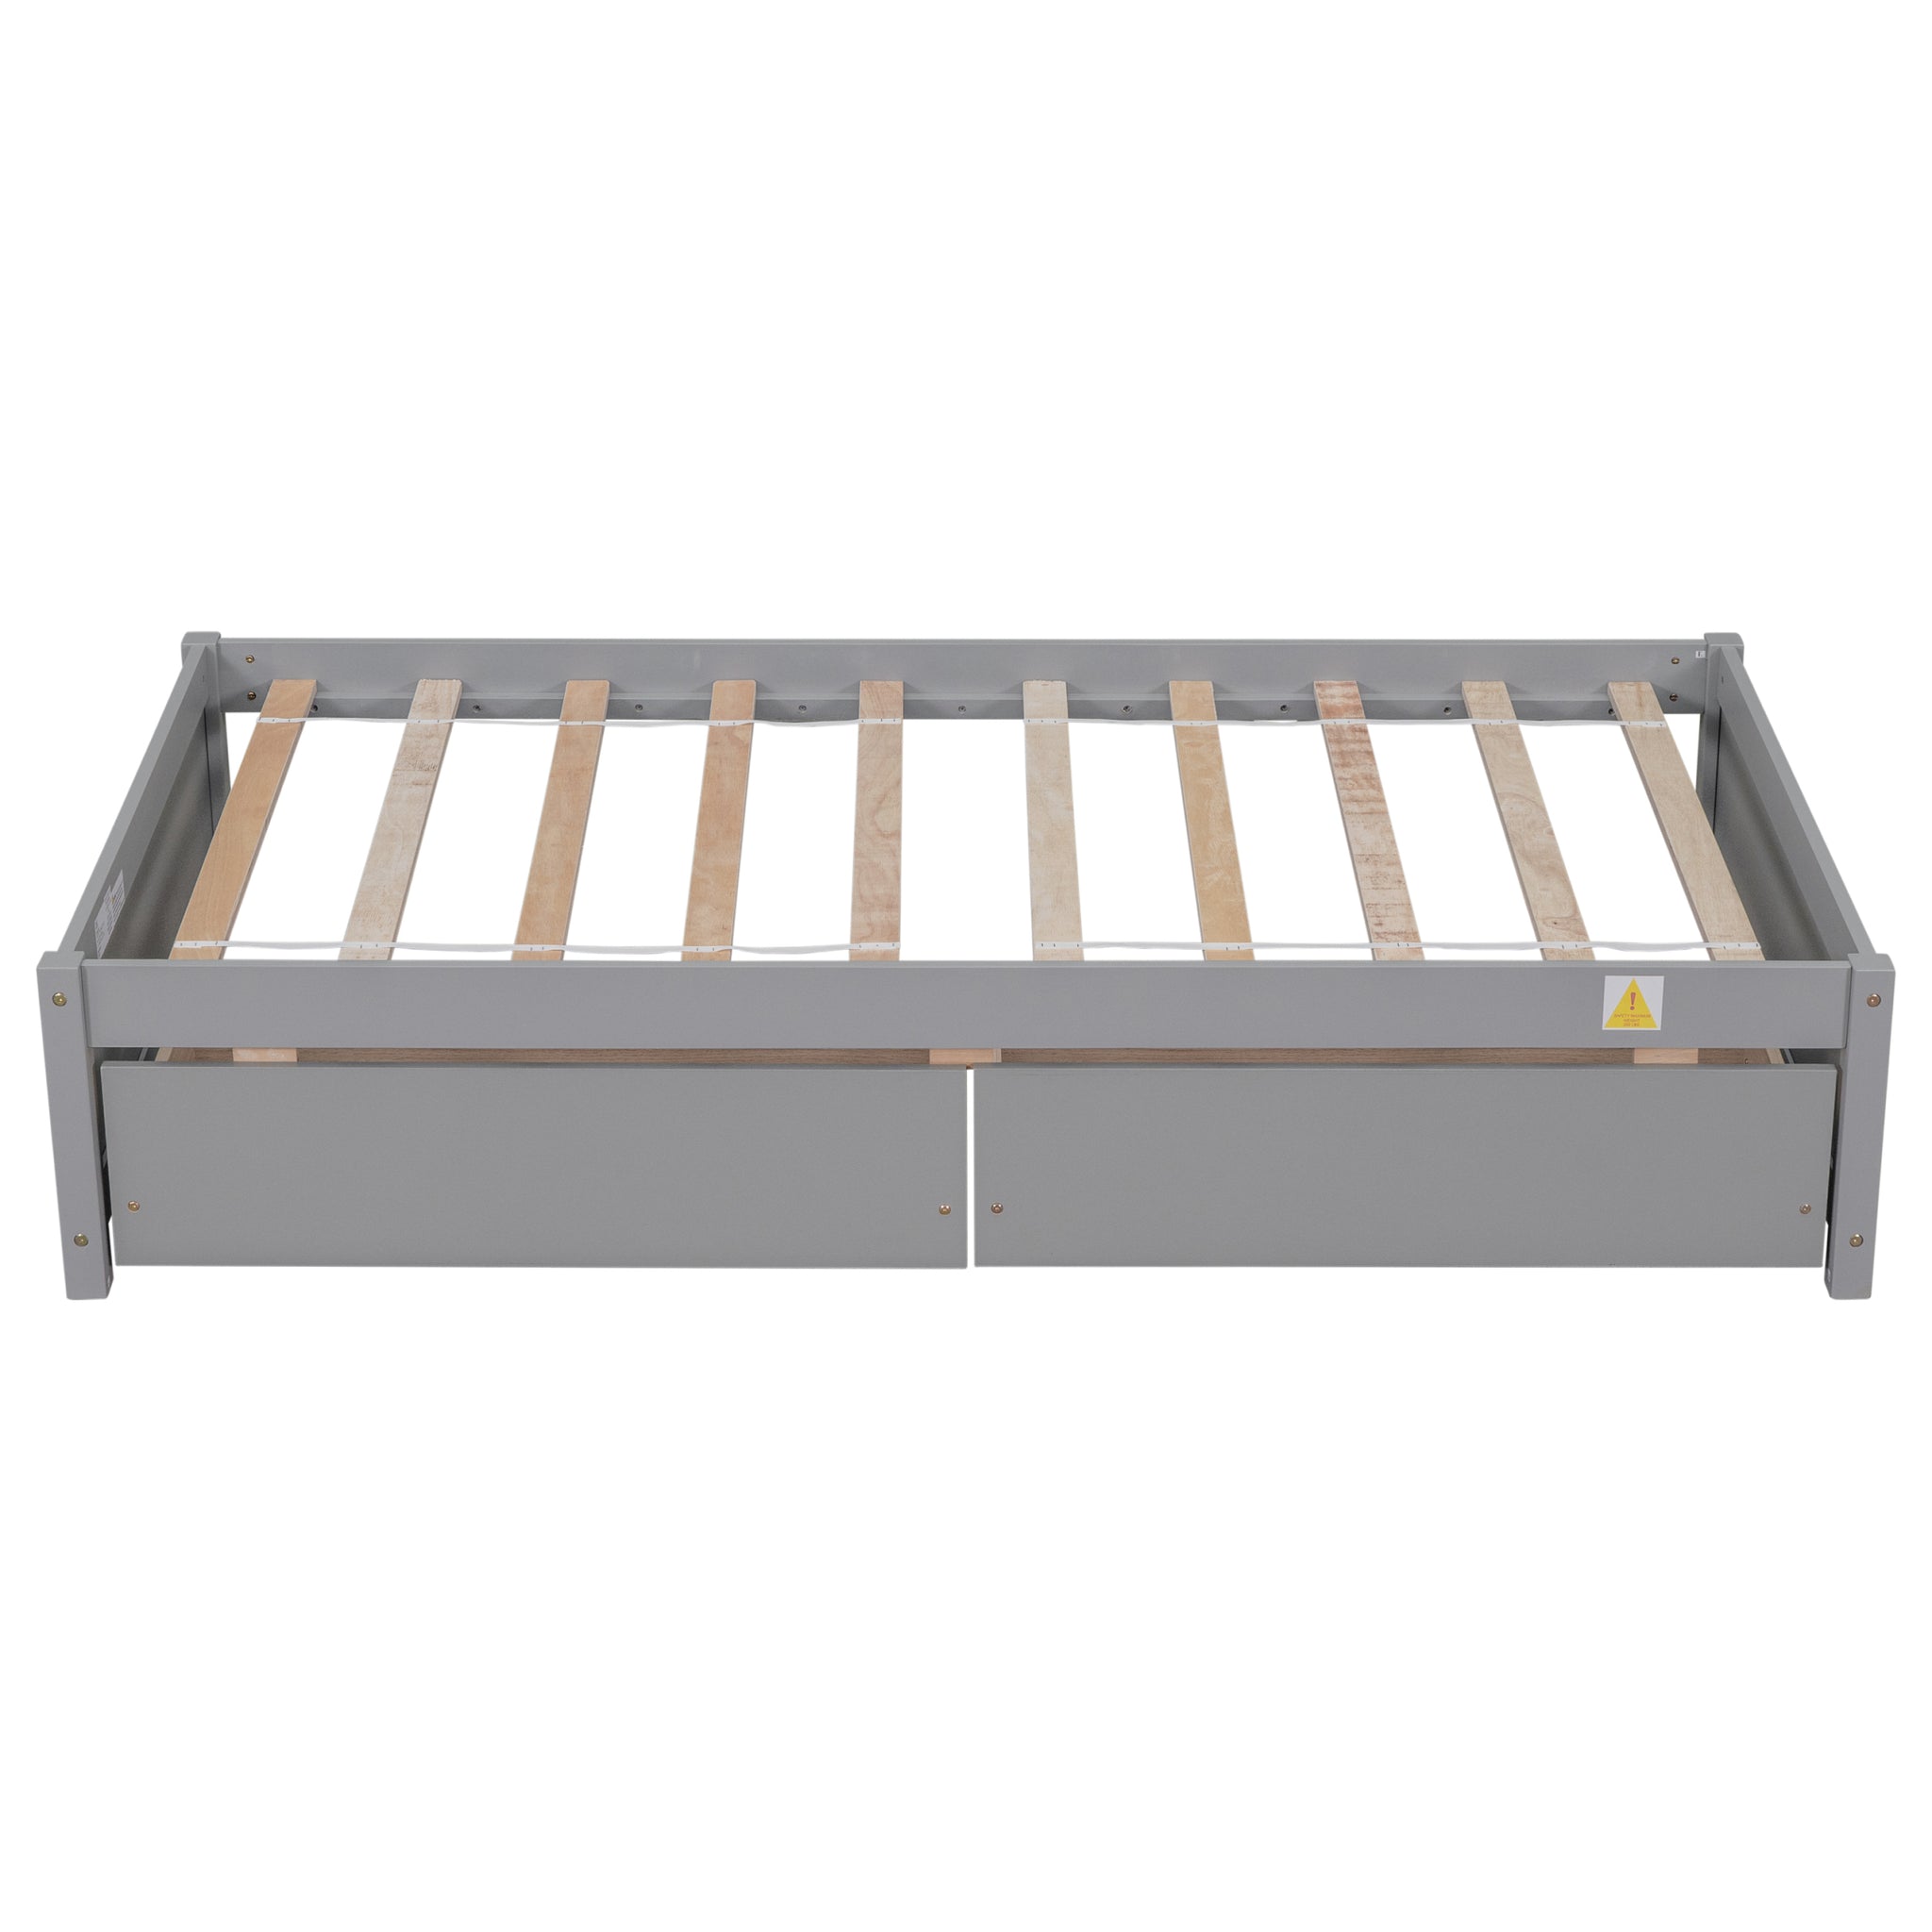 Twin Bed with 2 Drawers, Solid Wood, No Box Spring twin-grey-pine